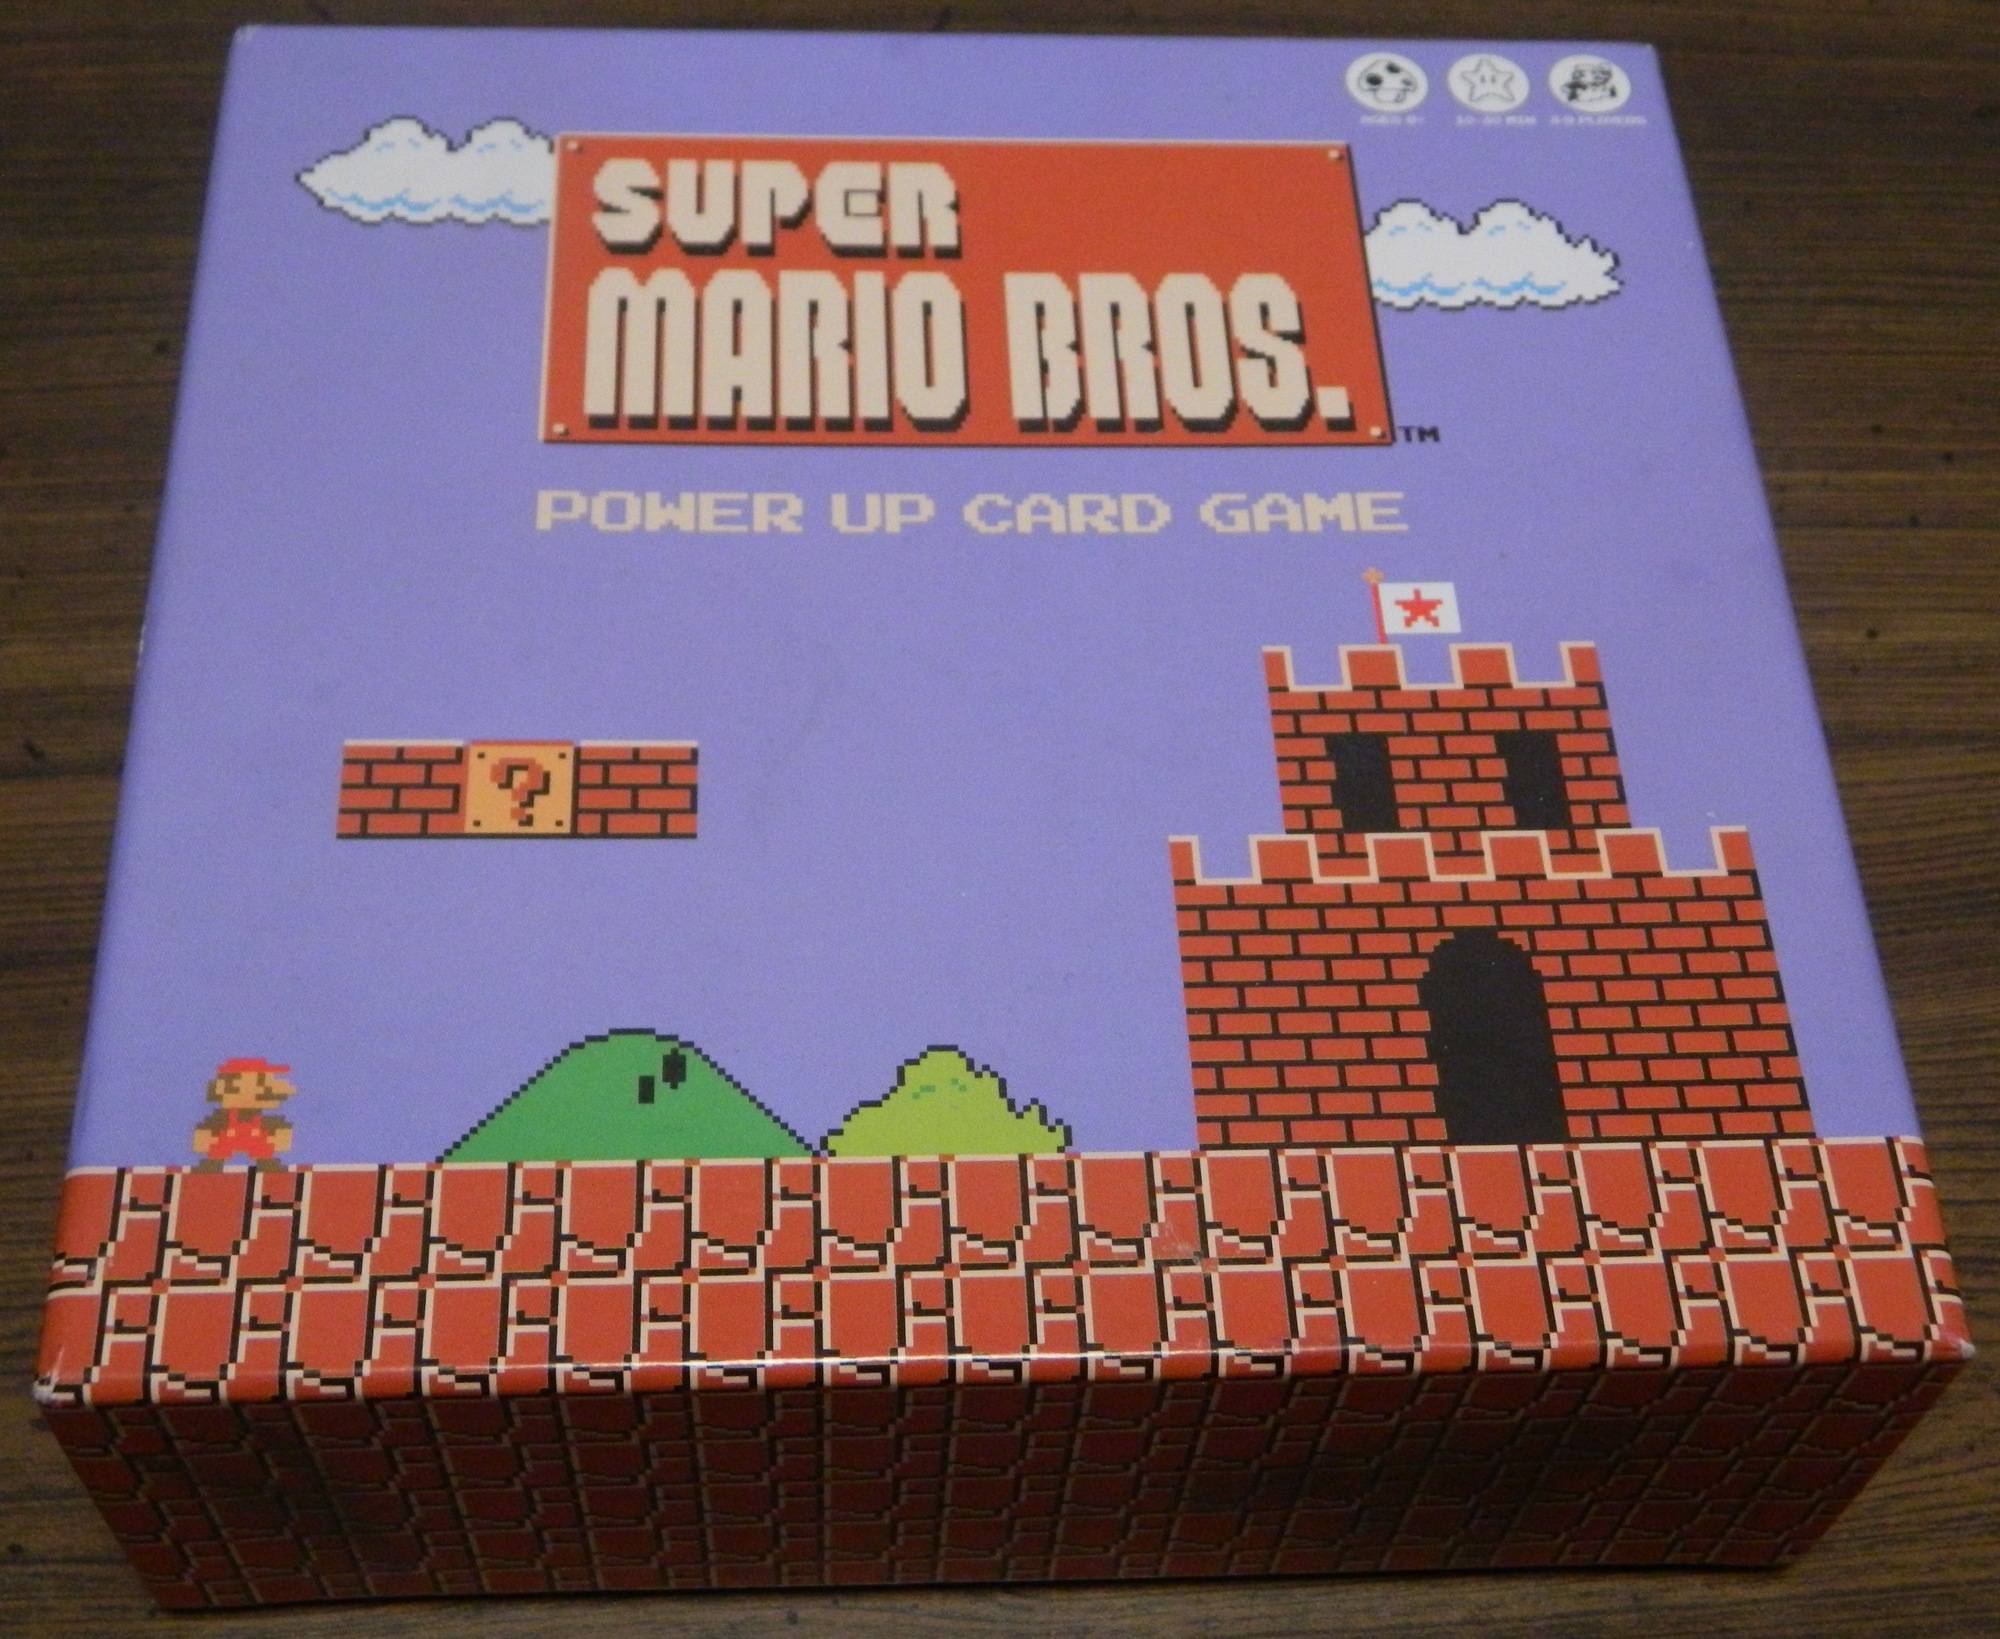 Super Mario Bros. Power Up Card Game Review and Rules